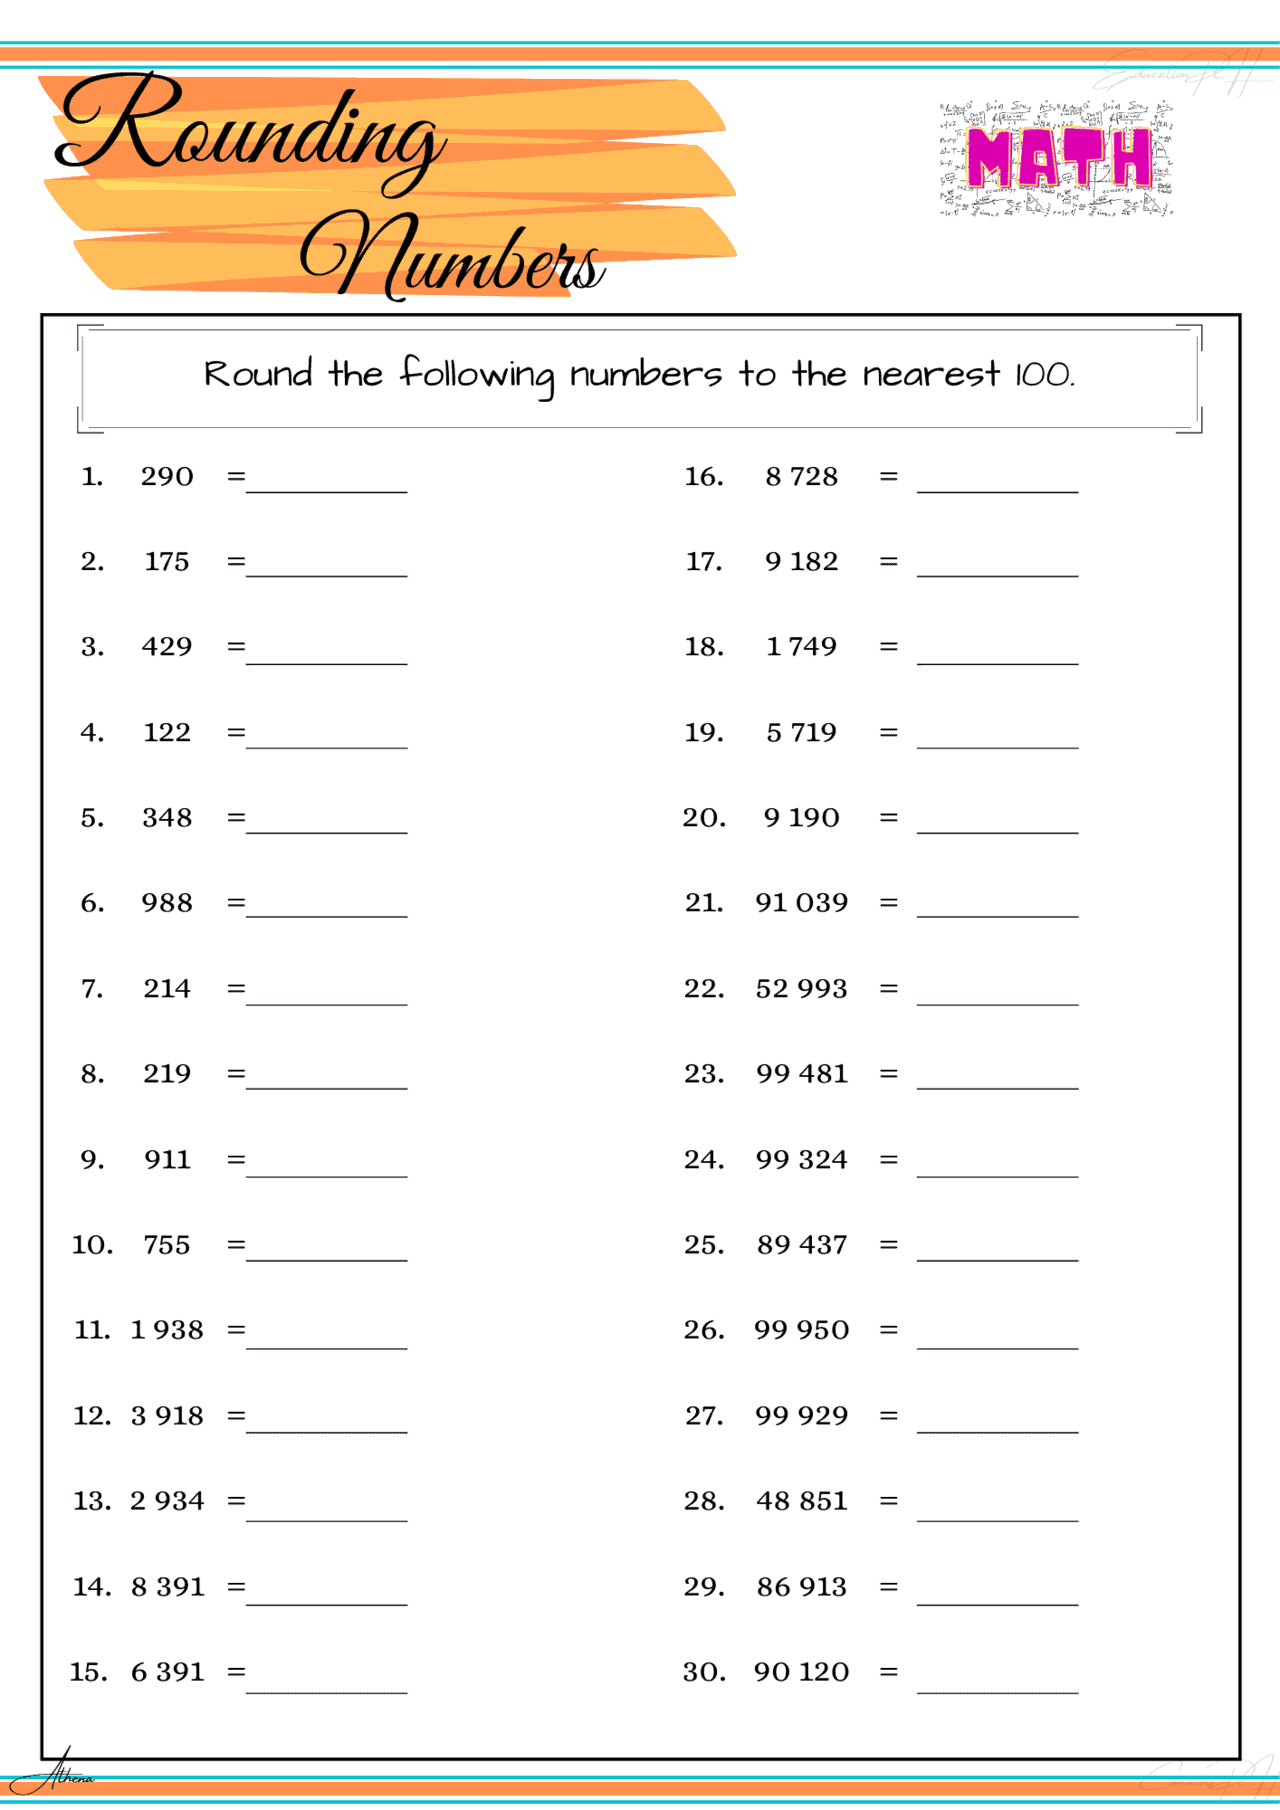 rounding-worksheets-for-4th-grade-free-worksheets